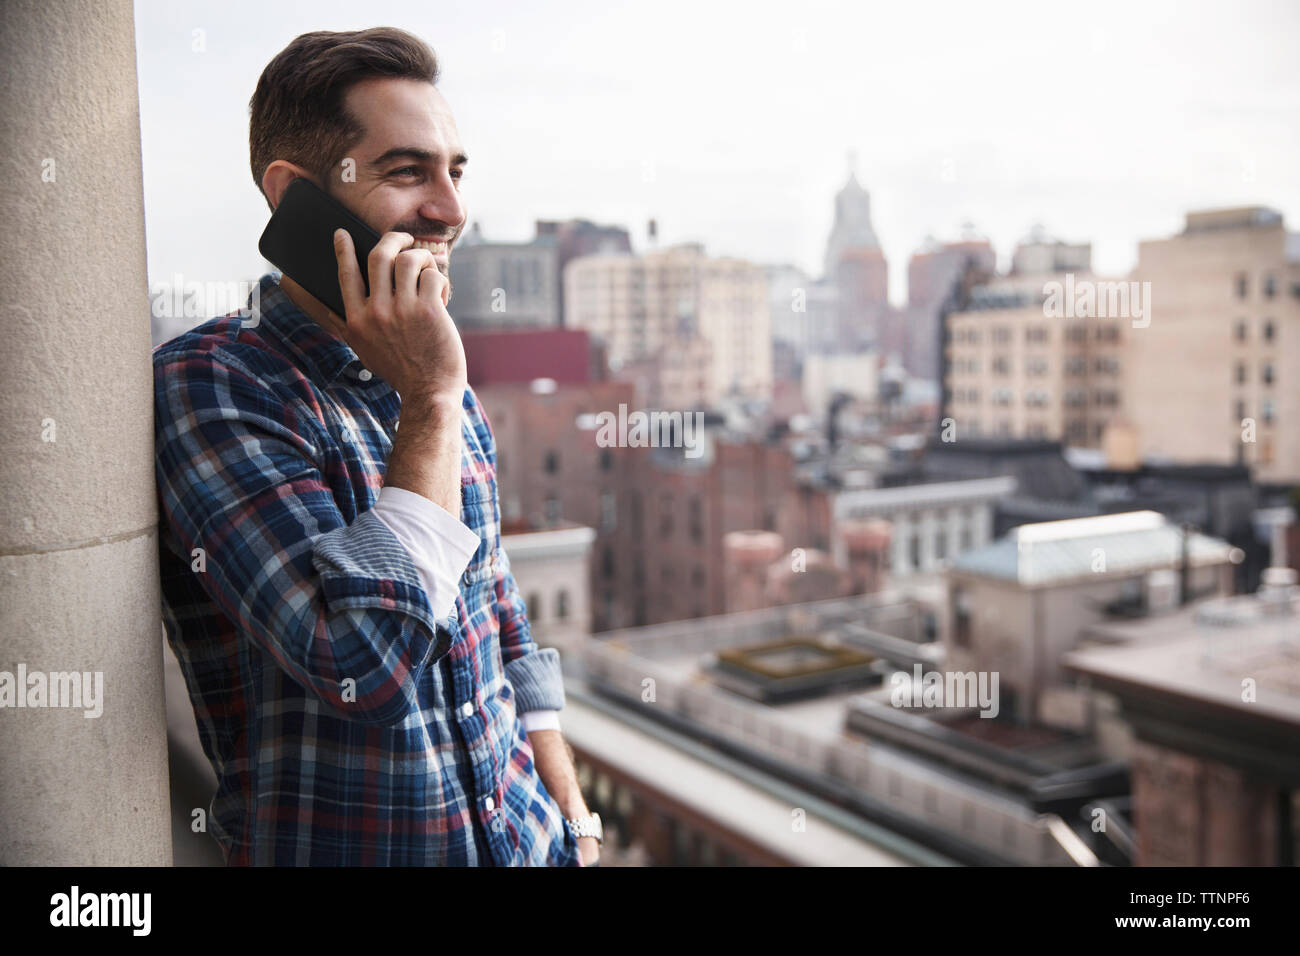 Smiling man talking on mobile phone while standing contre ville Banque D'Images